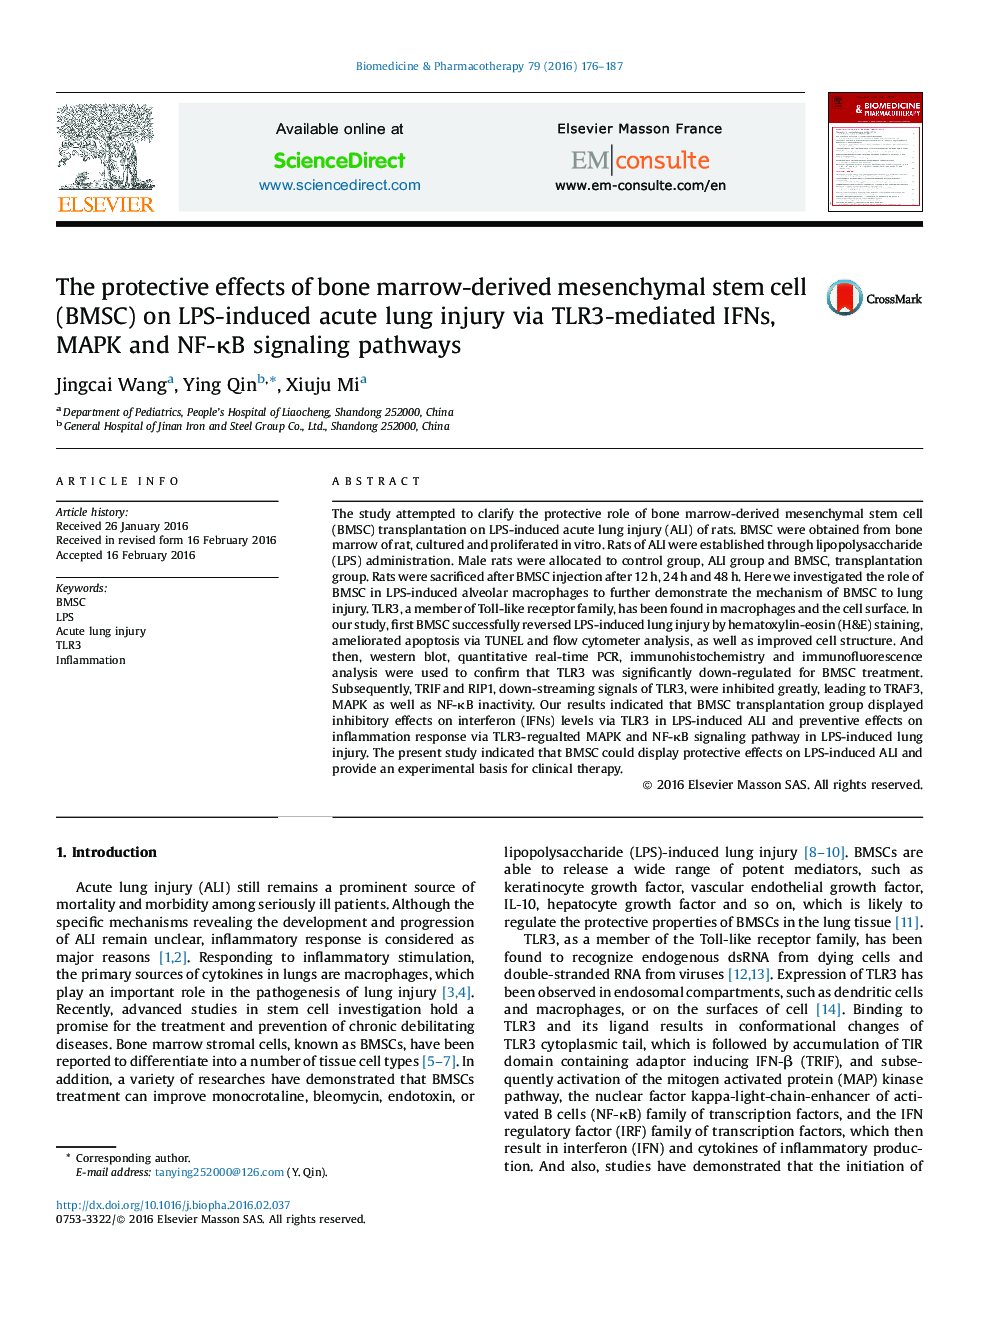 The protective effects of bone marrow-derived mesenchymal stem cell (BMSC) on LPS-induced acute lung injury via TLR3-mediated IFNs, MAPK and NF-κB signaling pathways